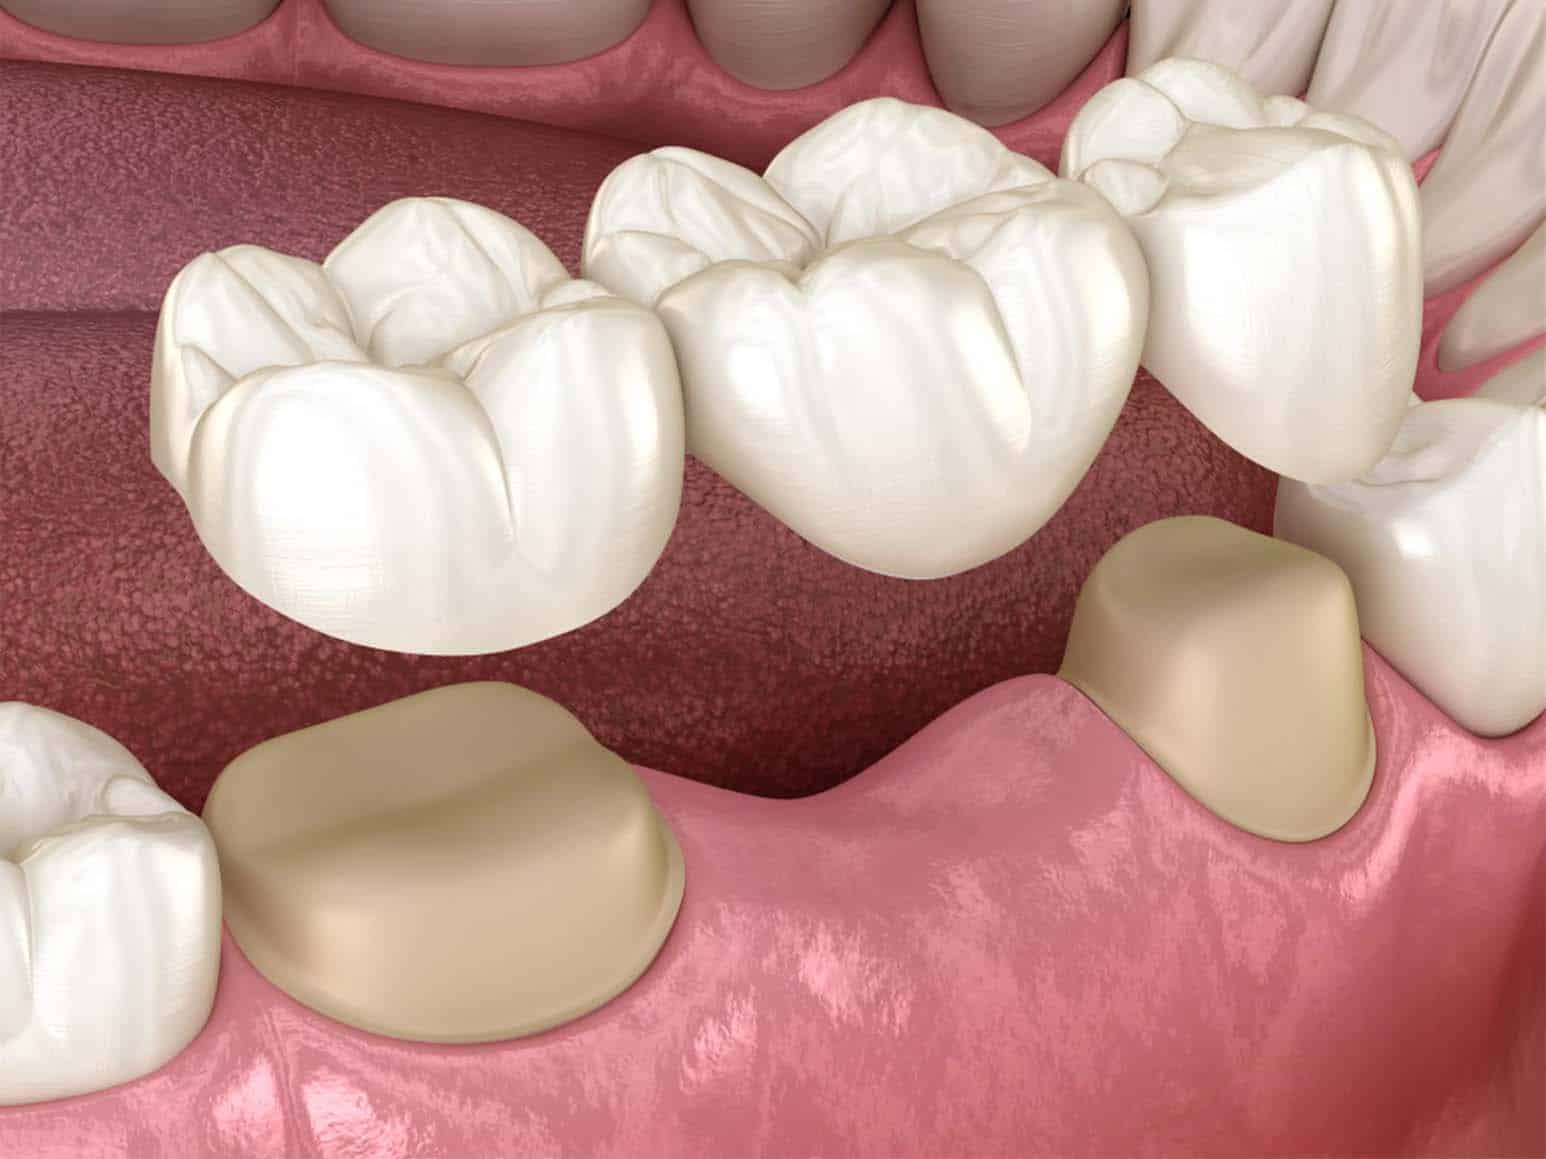 Tooth Crowns Example